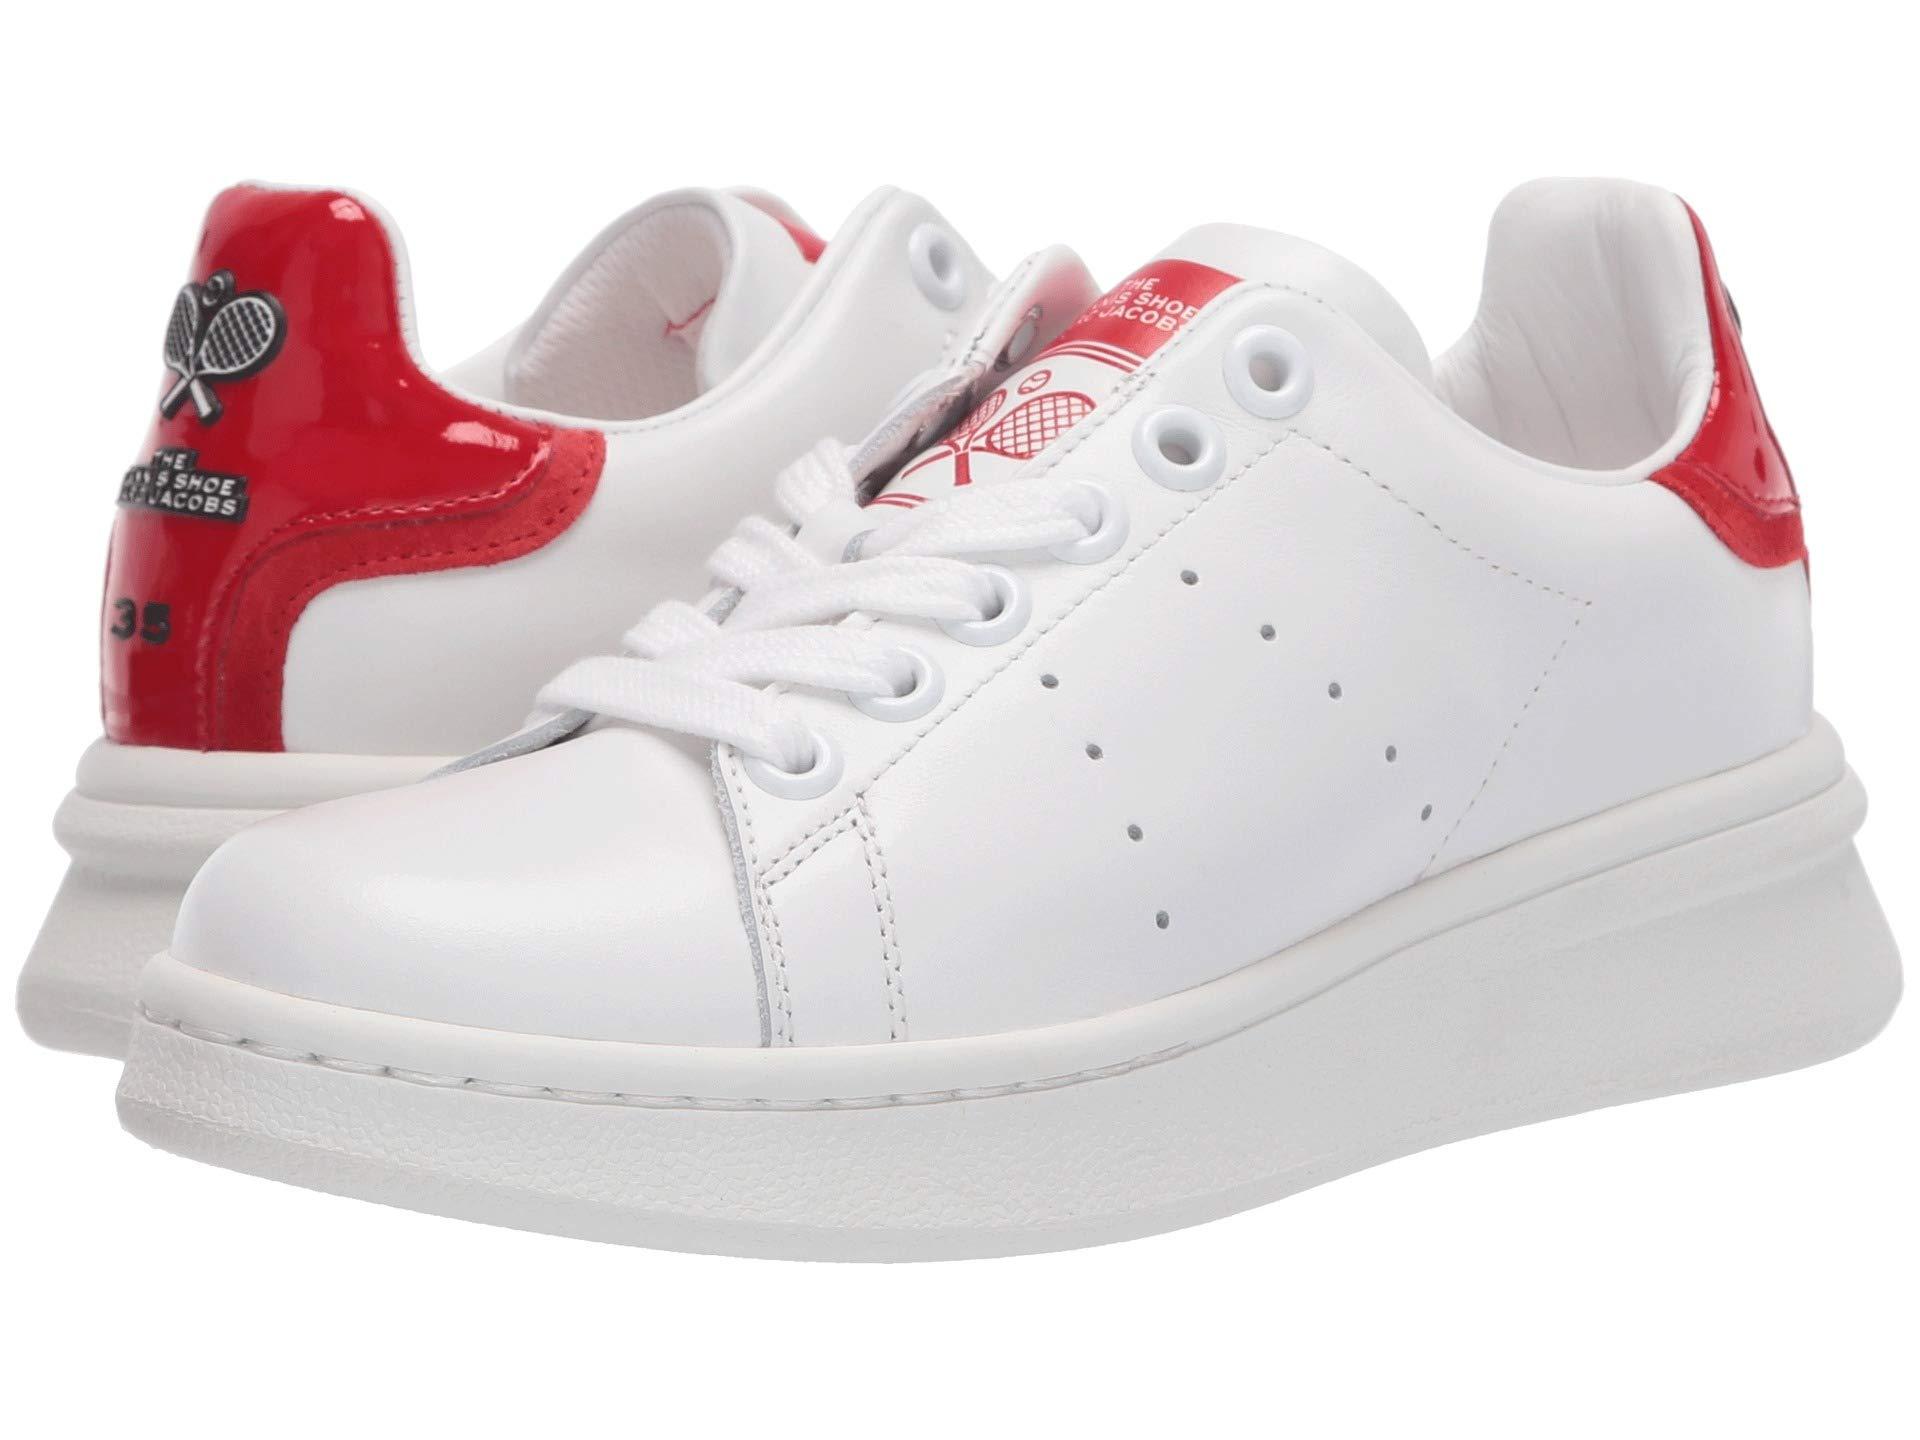 Marc Jacobs The Tennis Shoe in White/Red (White) - Save 25% | Lyst